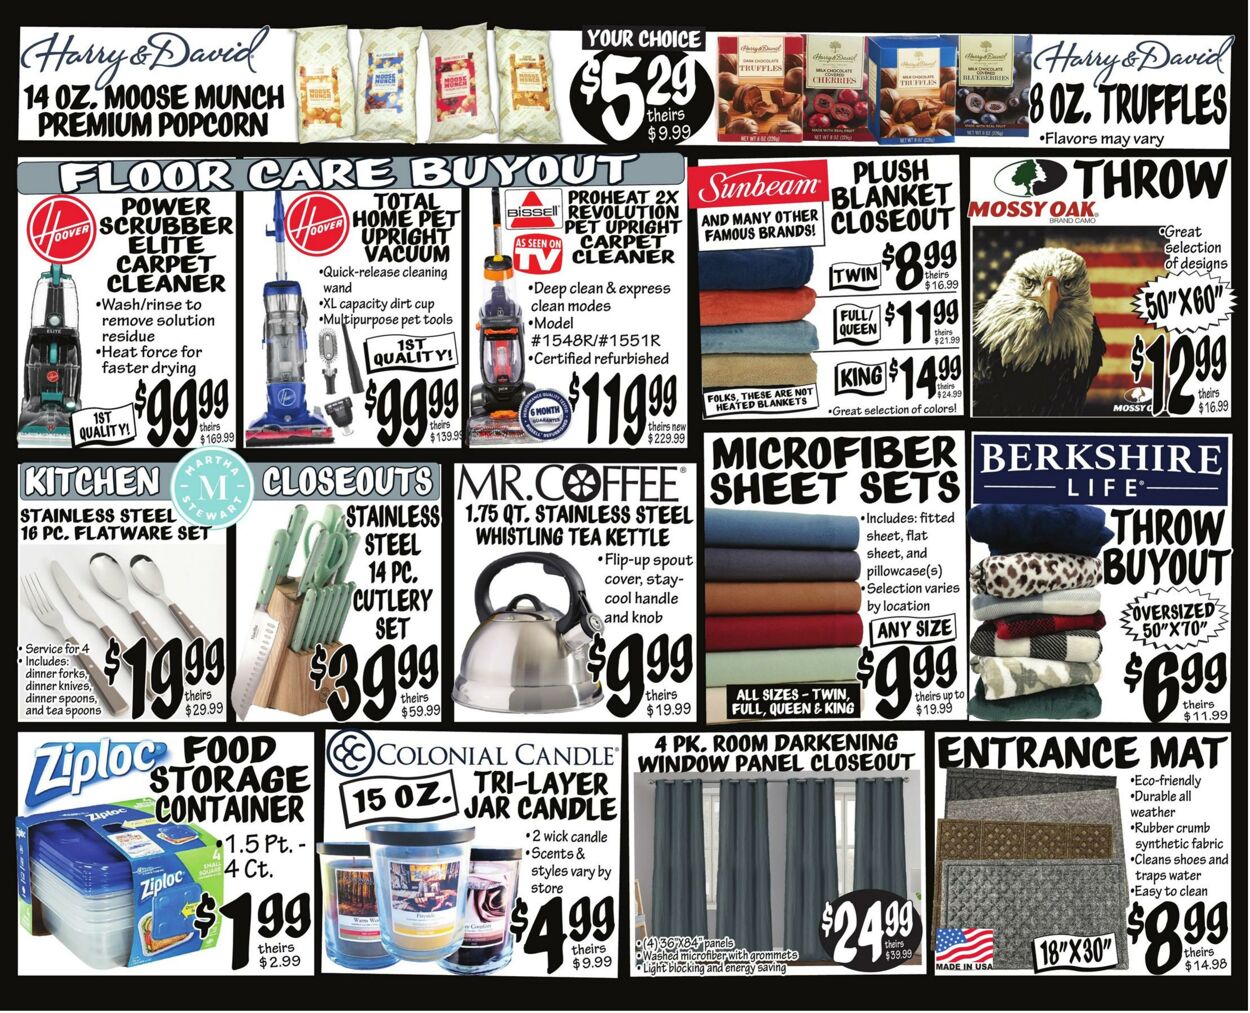 Weekly ad Ollie's 11/30/2022 - 12/06/2022